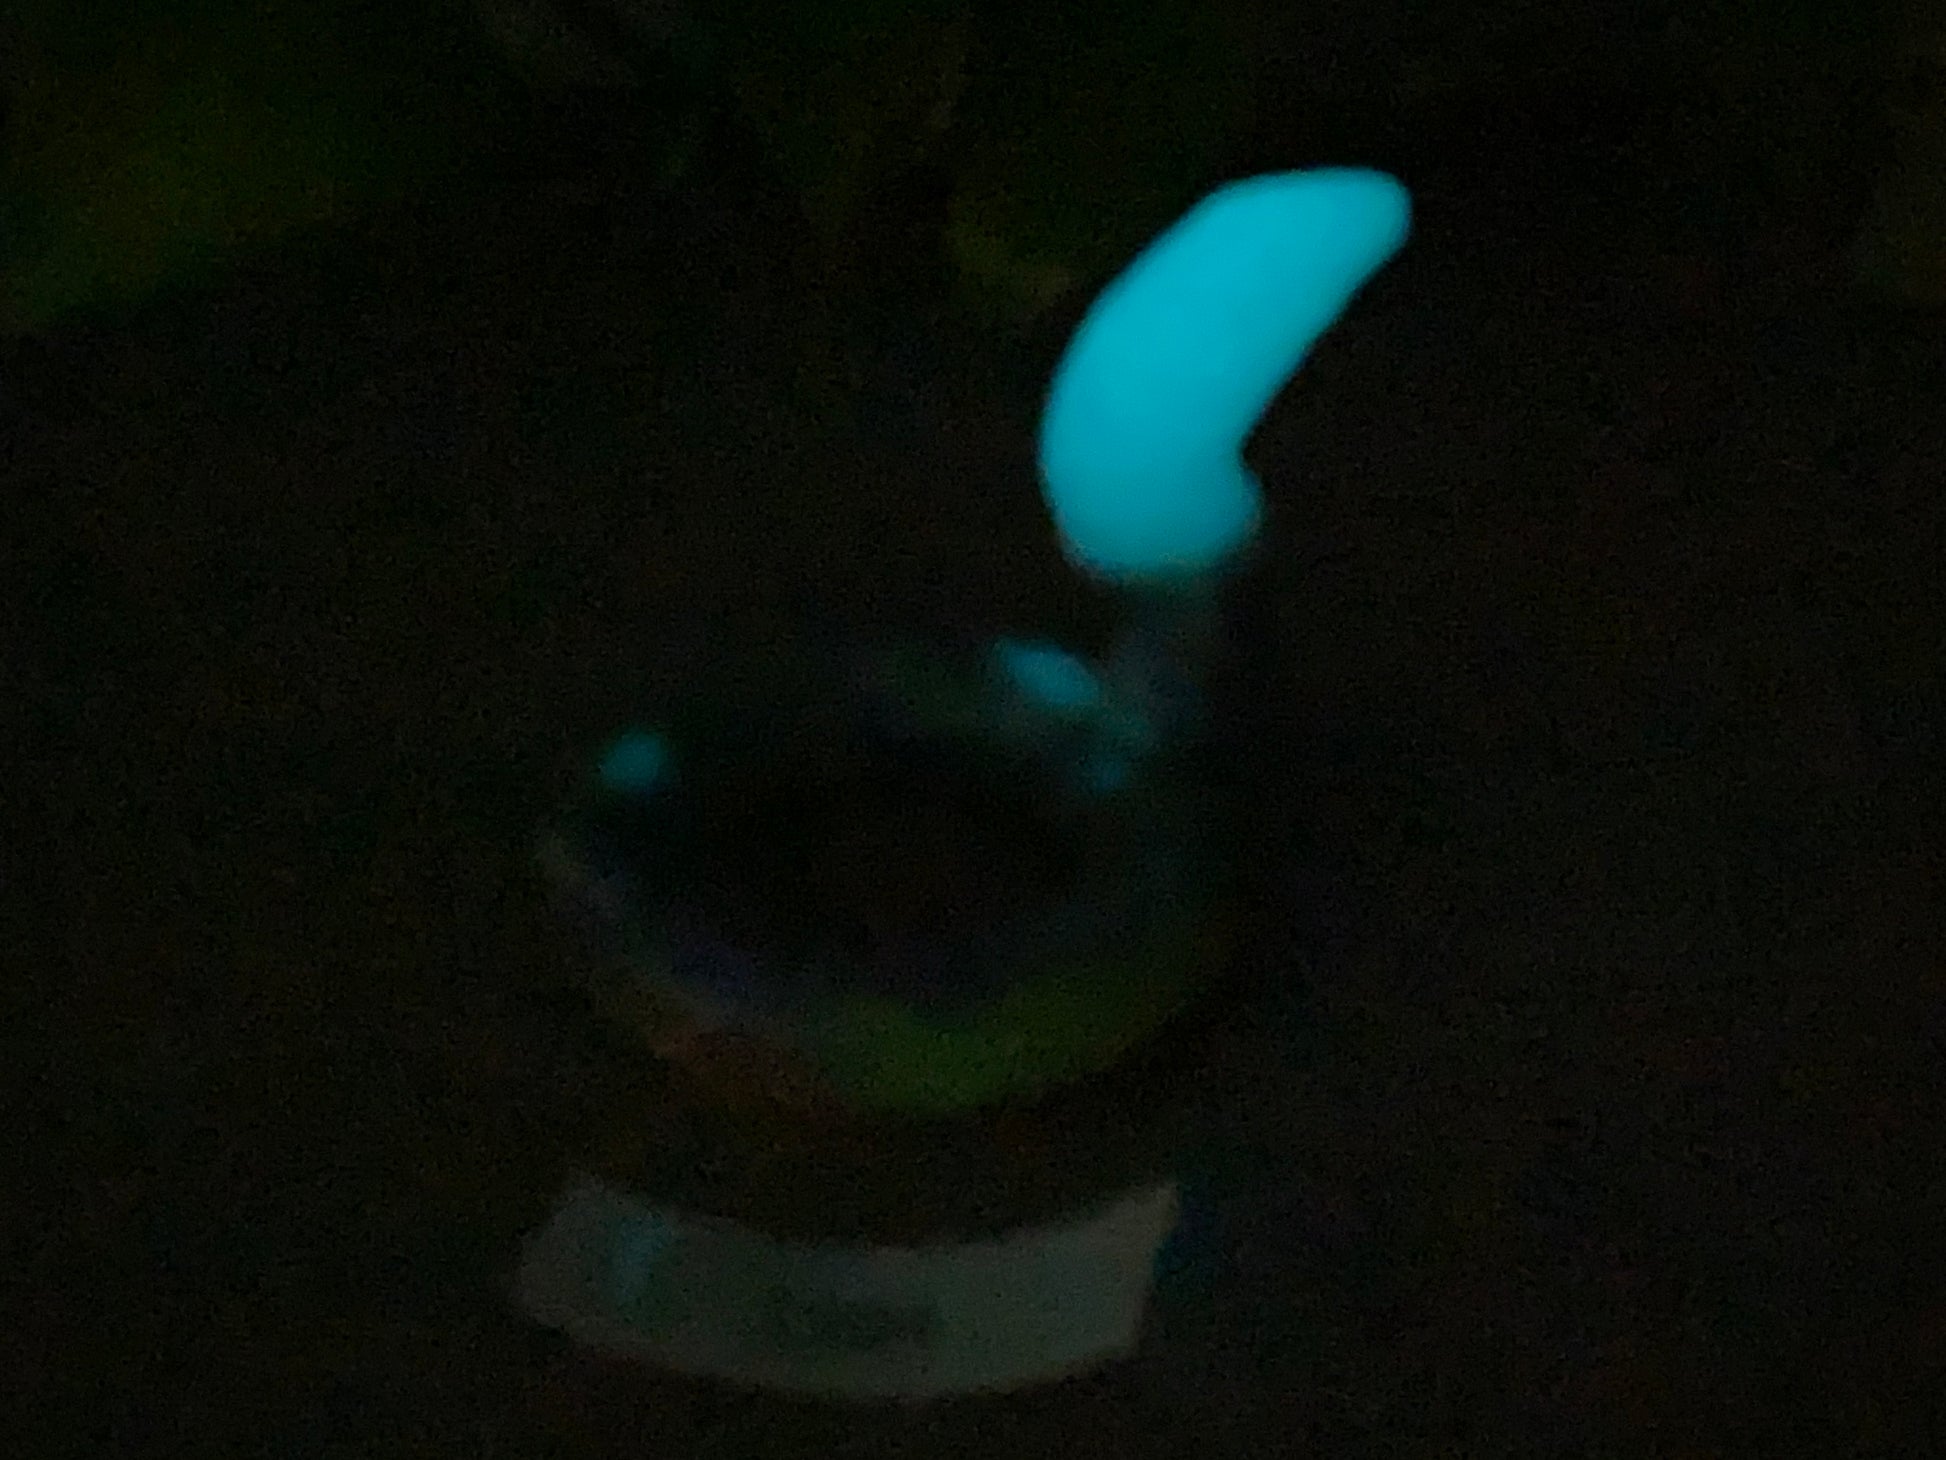 a glowing object in the dark with a blurry background